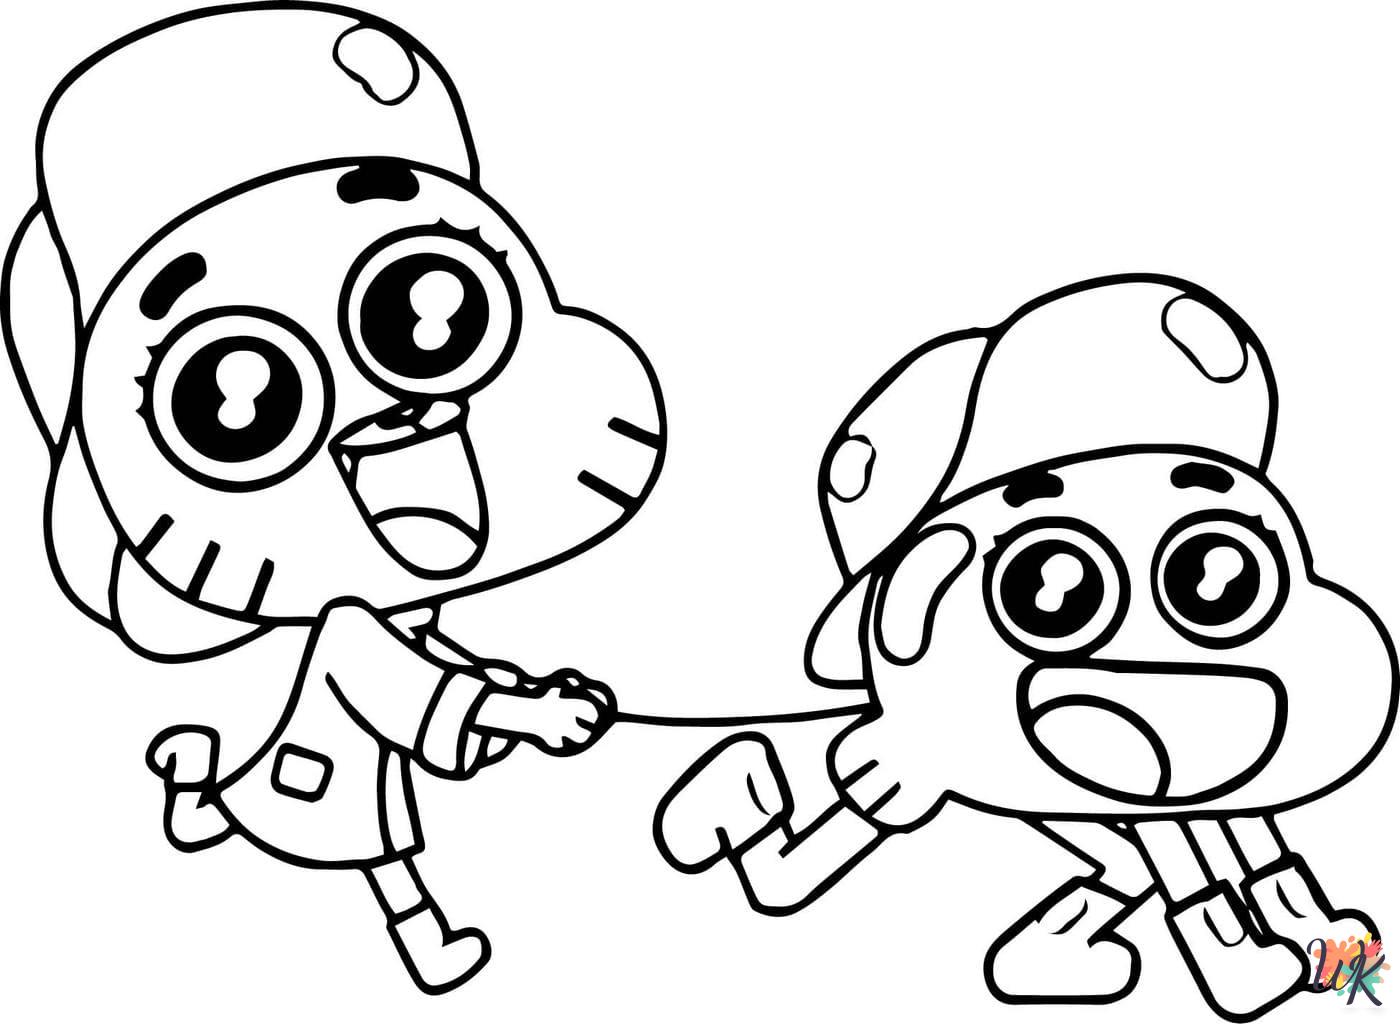 Gumball printable coloring pages 1